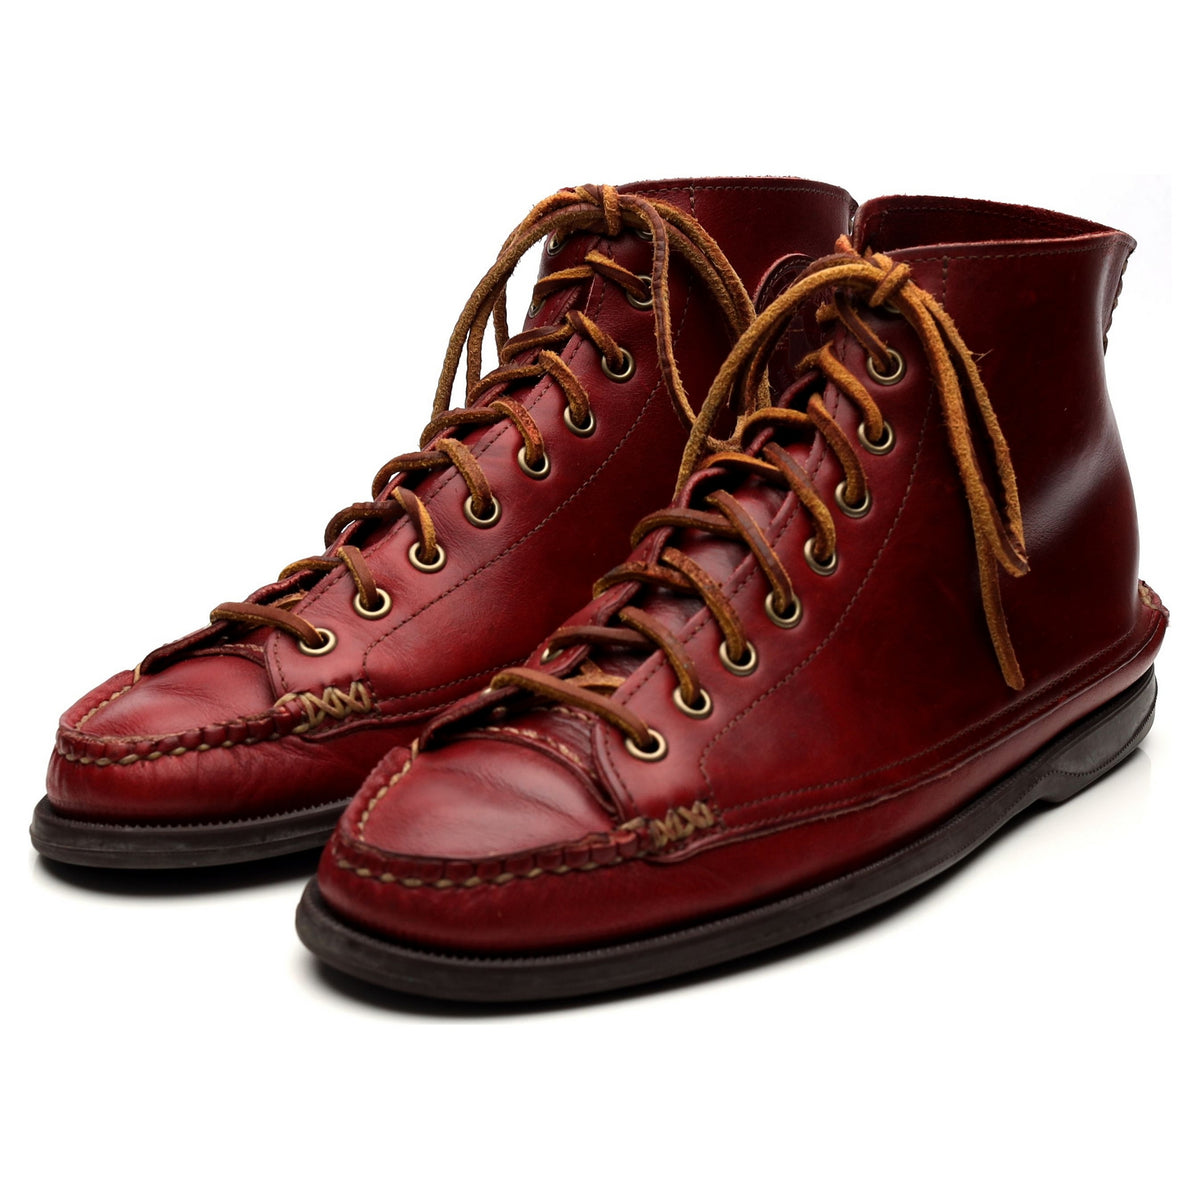 Red Leather Boots UK 8 US 9